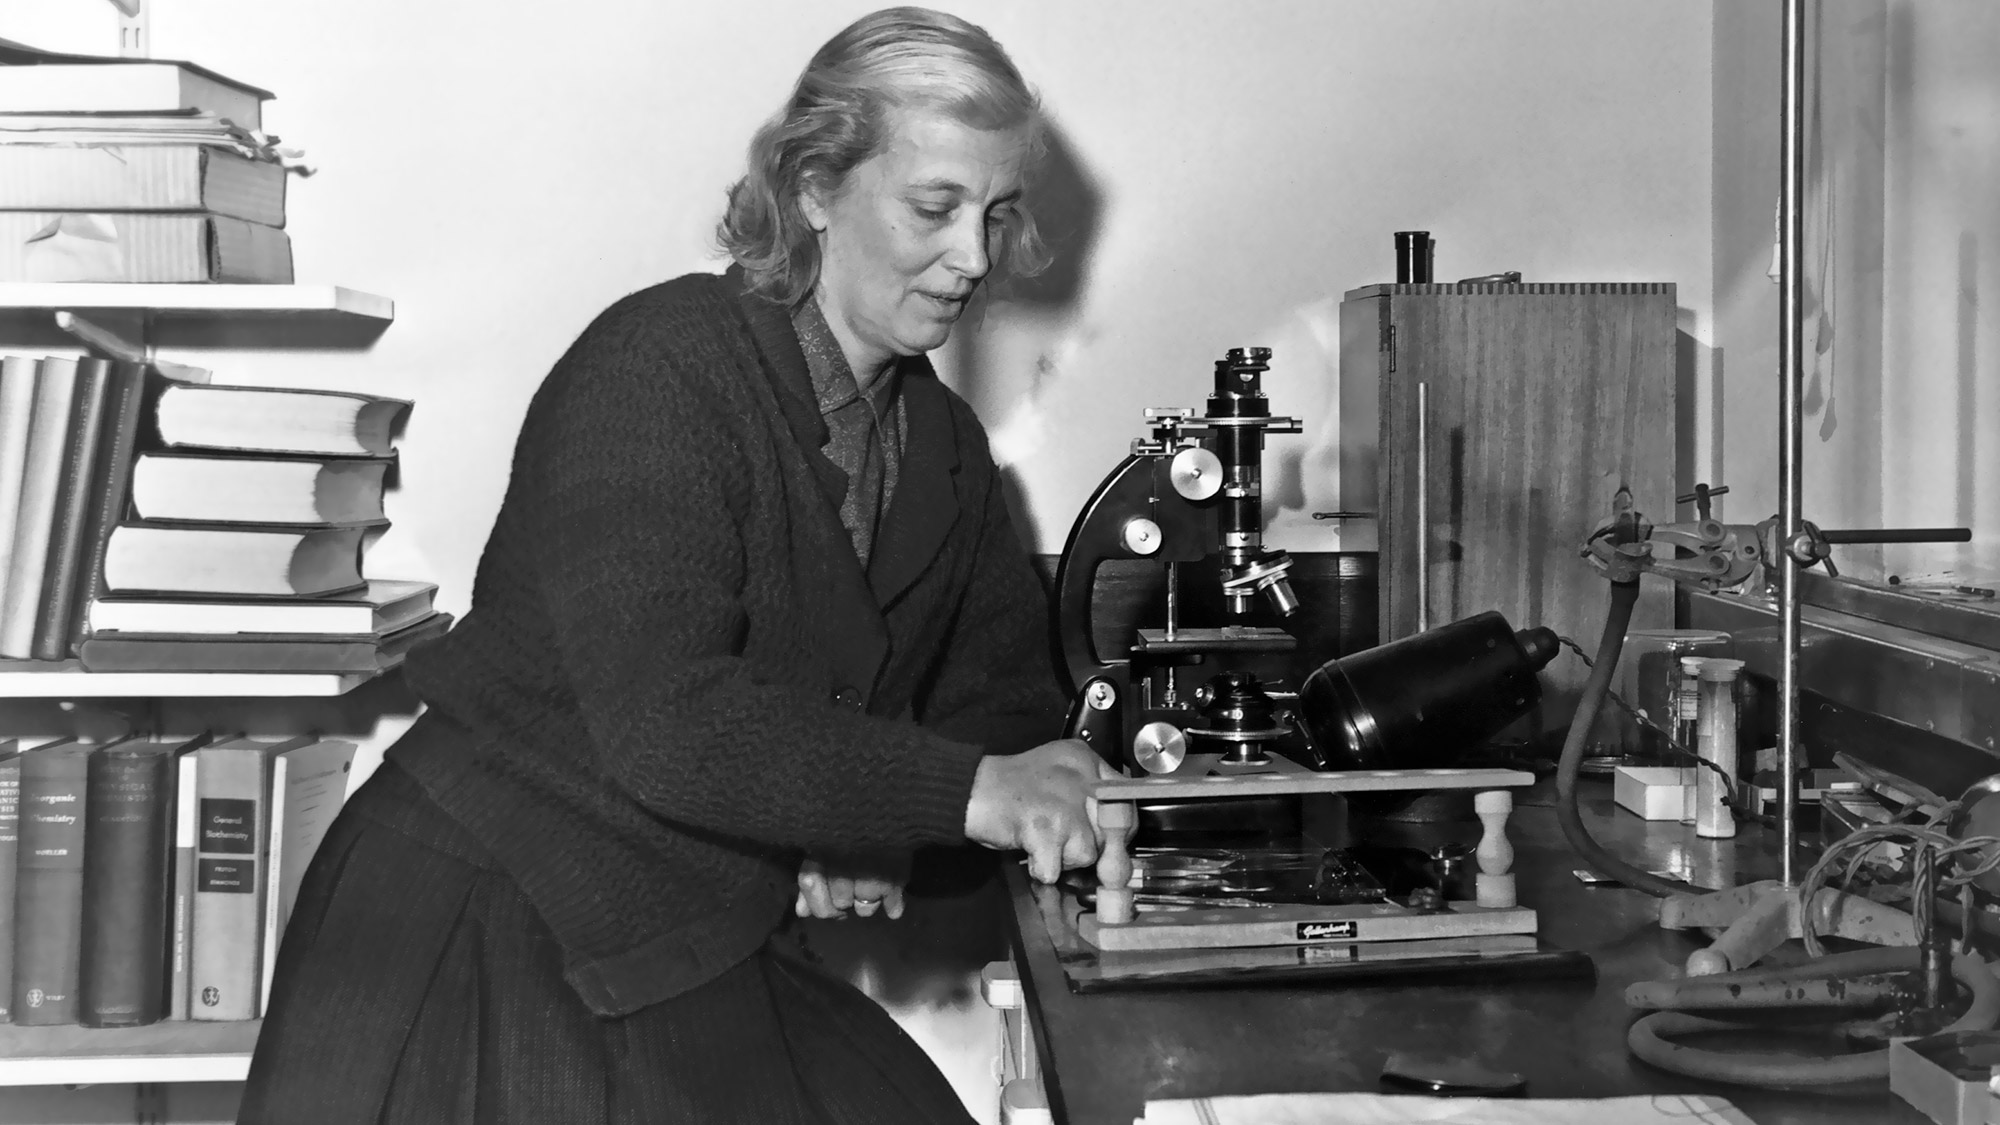 Dorothy Hodgkin, reknowned X-ray crystallographer and chemist